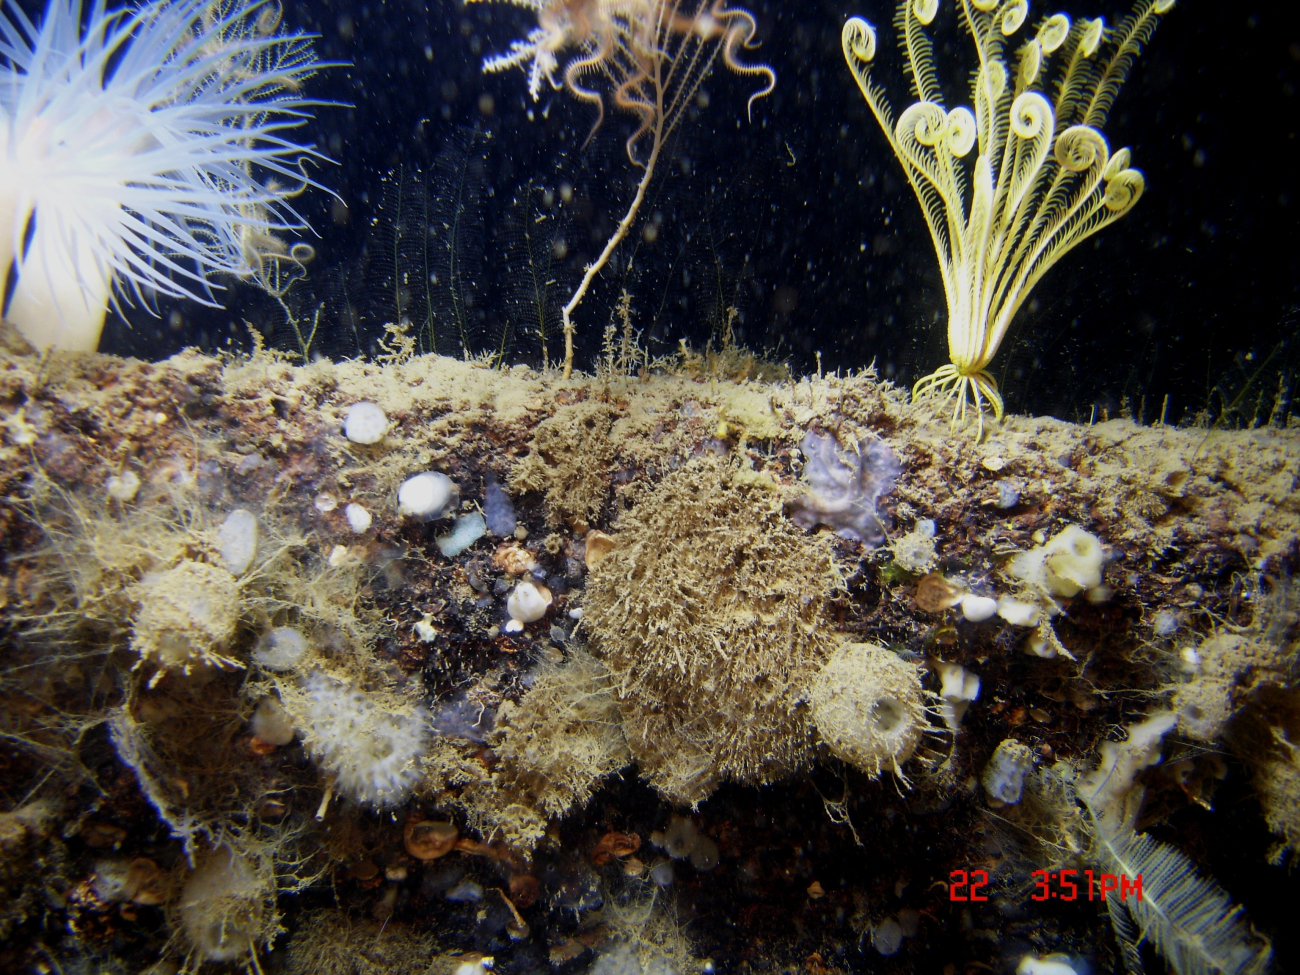 A diverse assemblage of life including a large yellow feather star crinoid, twolarge white anemones, a small coral with associated brittle star, small sponges, hydroids, and other life forms